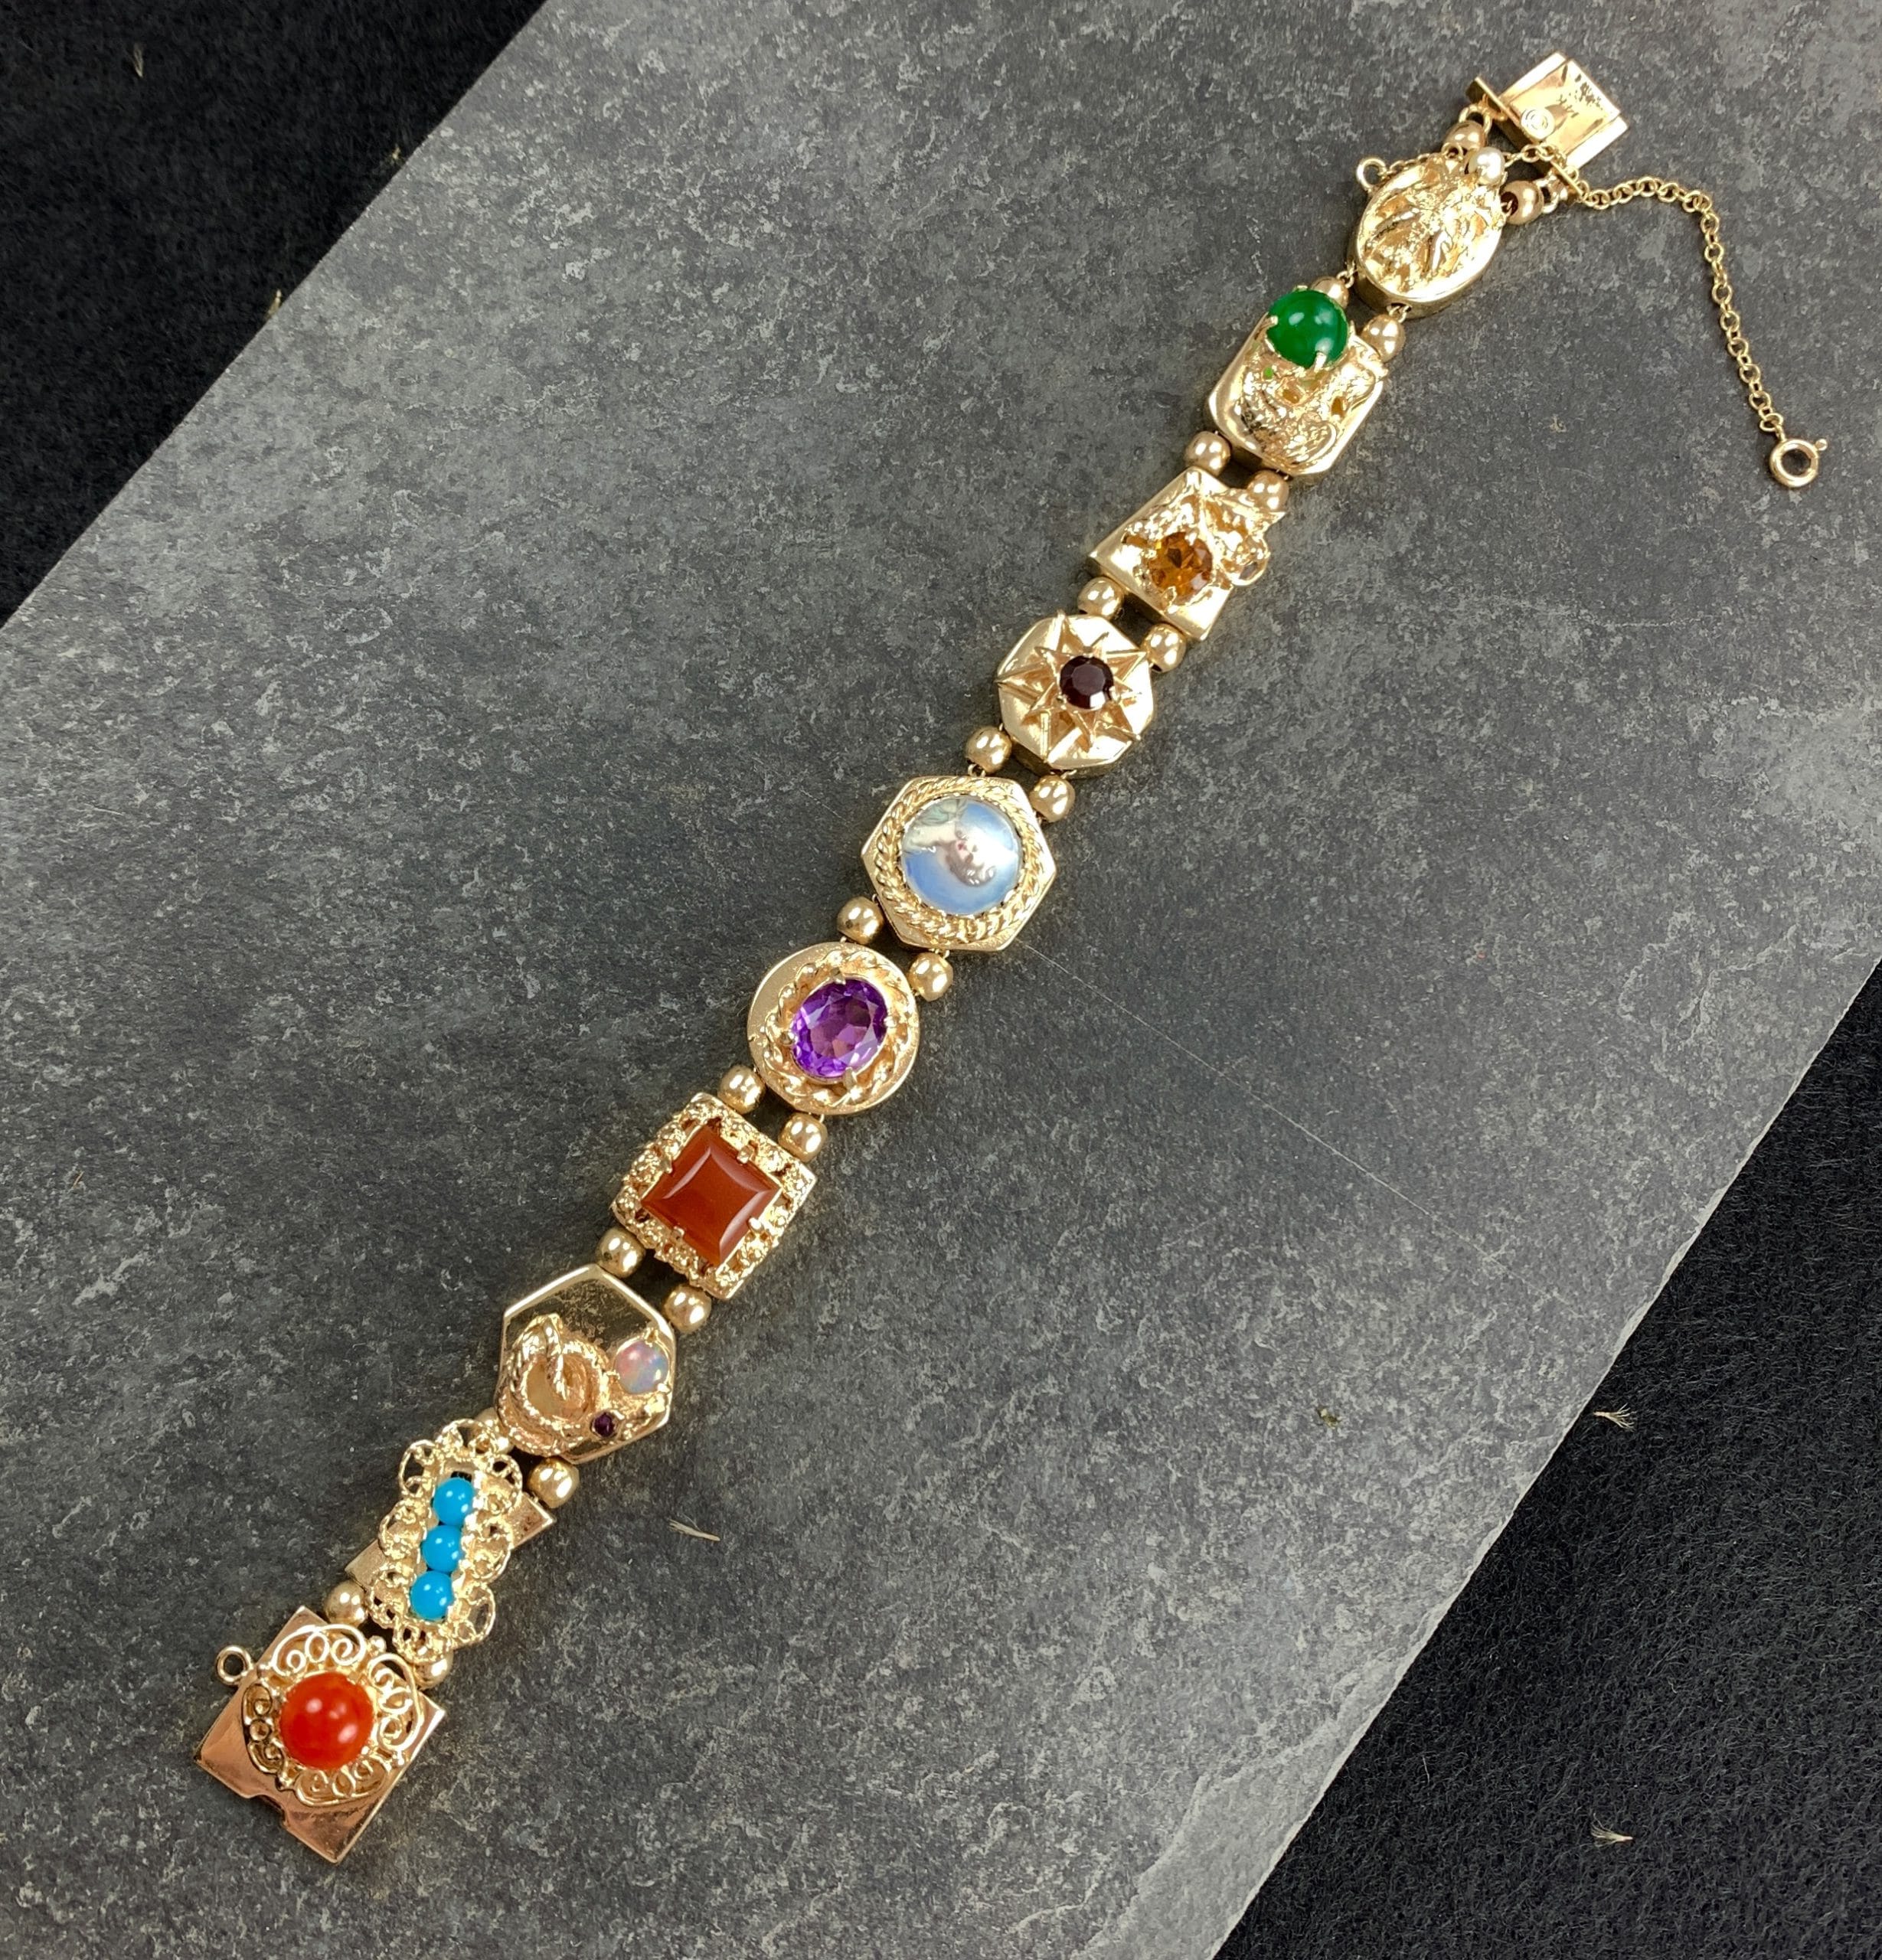 Vintage Artistic Multi Stone Bracelet with Gems and Enamel in 14k Yellow  Gold (A2486) - Summit Jewelers | 7821 Big Bend Blvd. | Webster Groves, MO |  63119